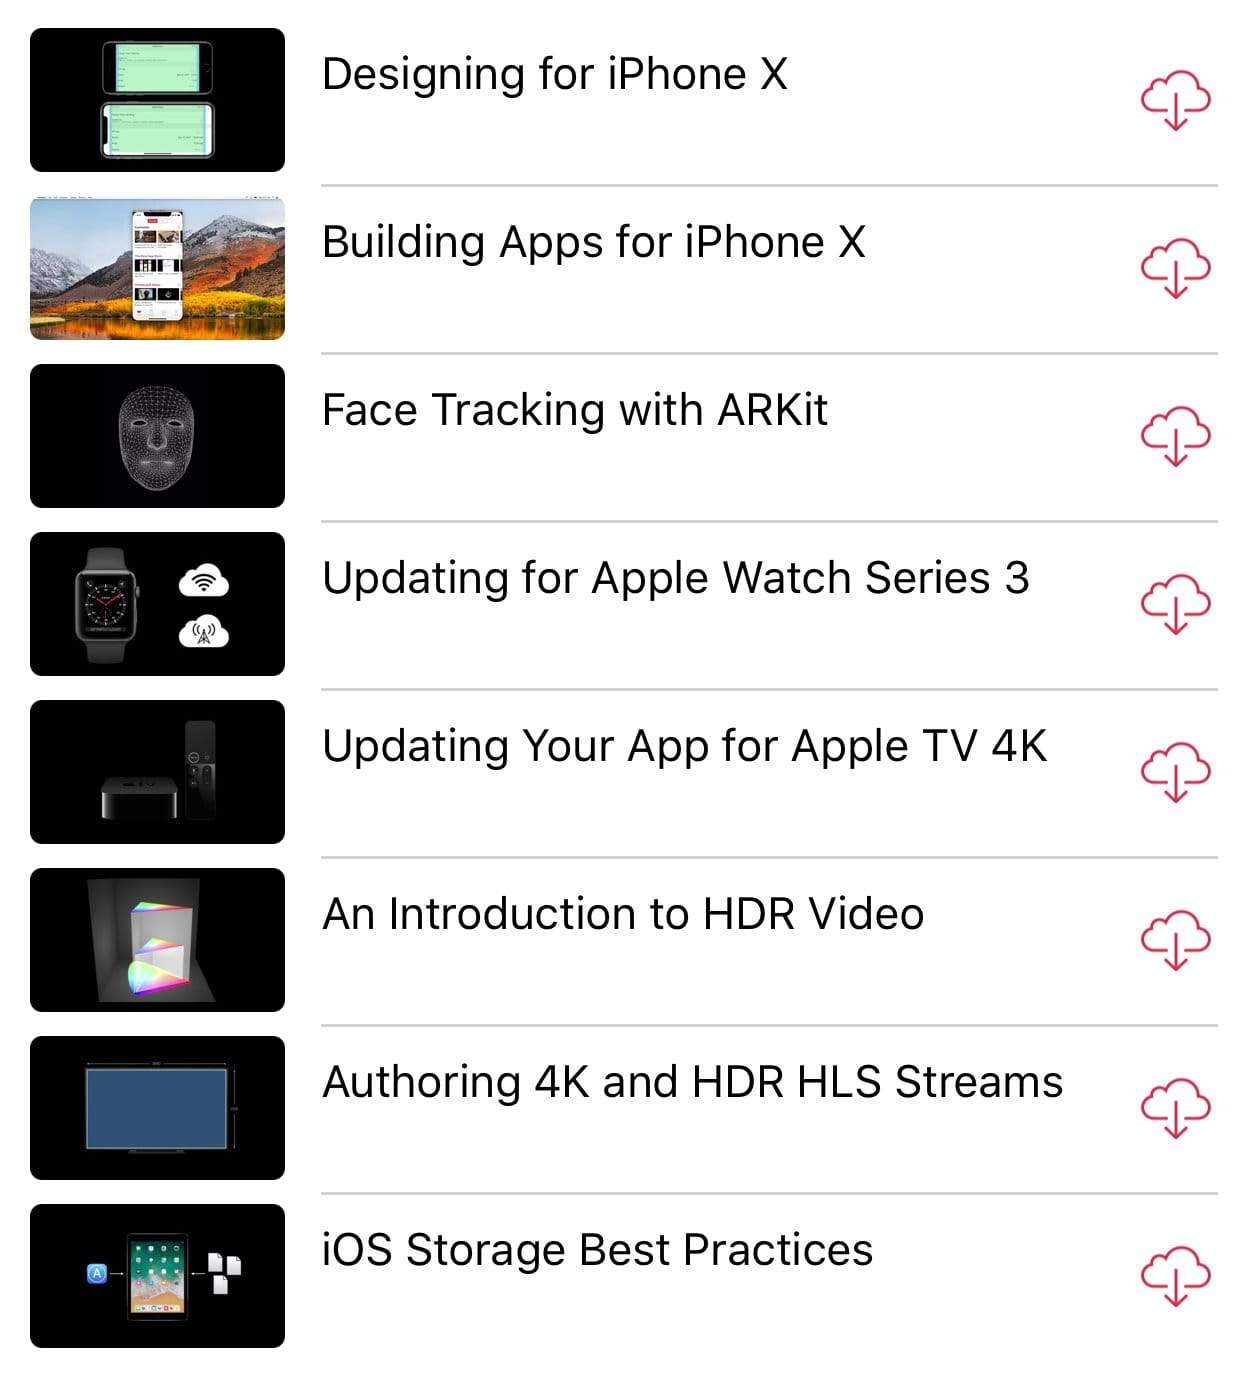 WWDC app with videos for iPhone X